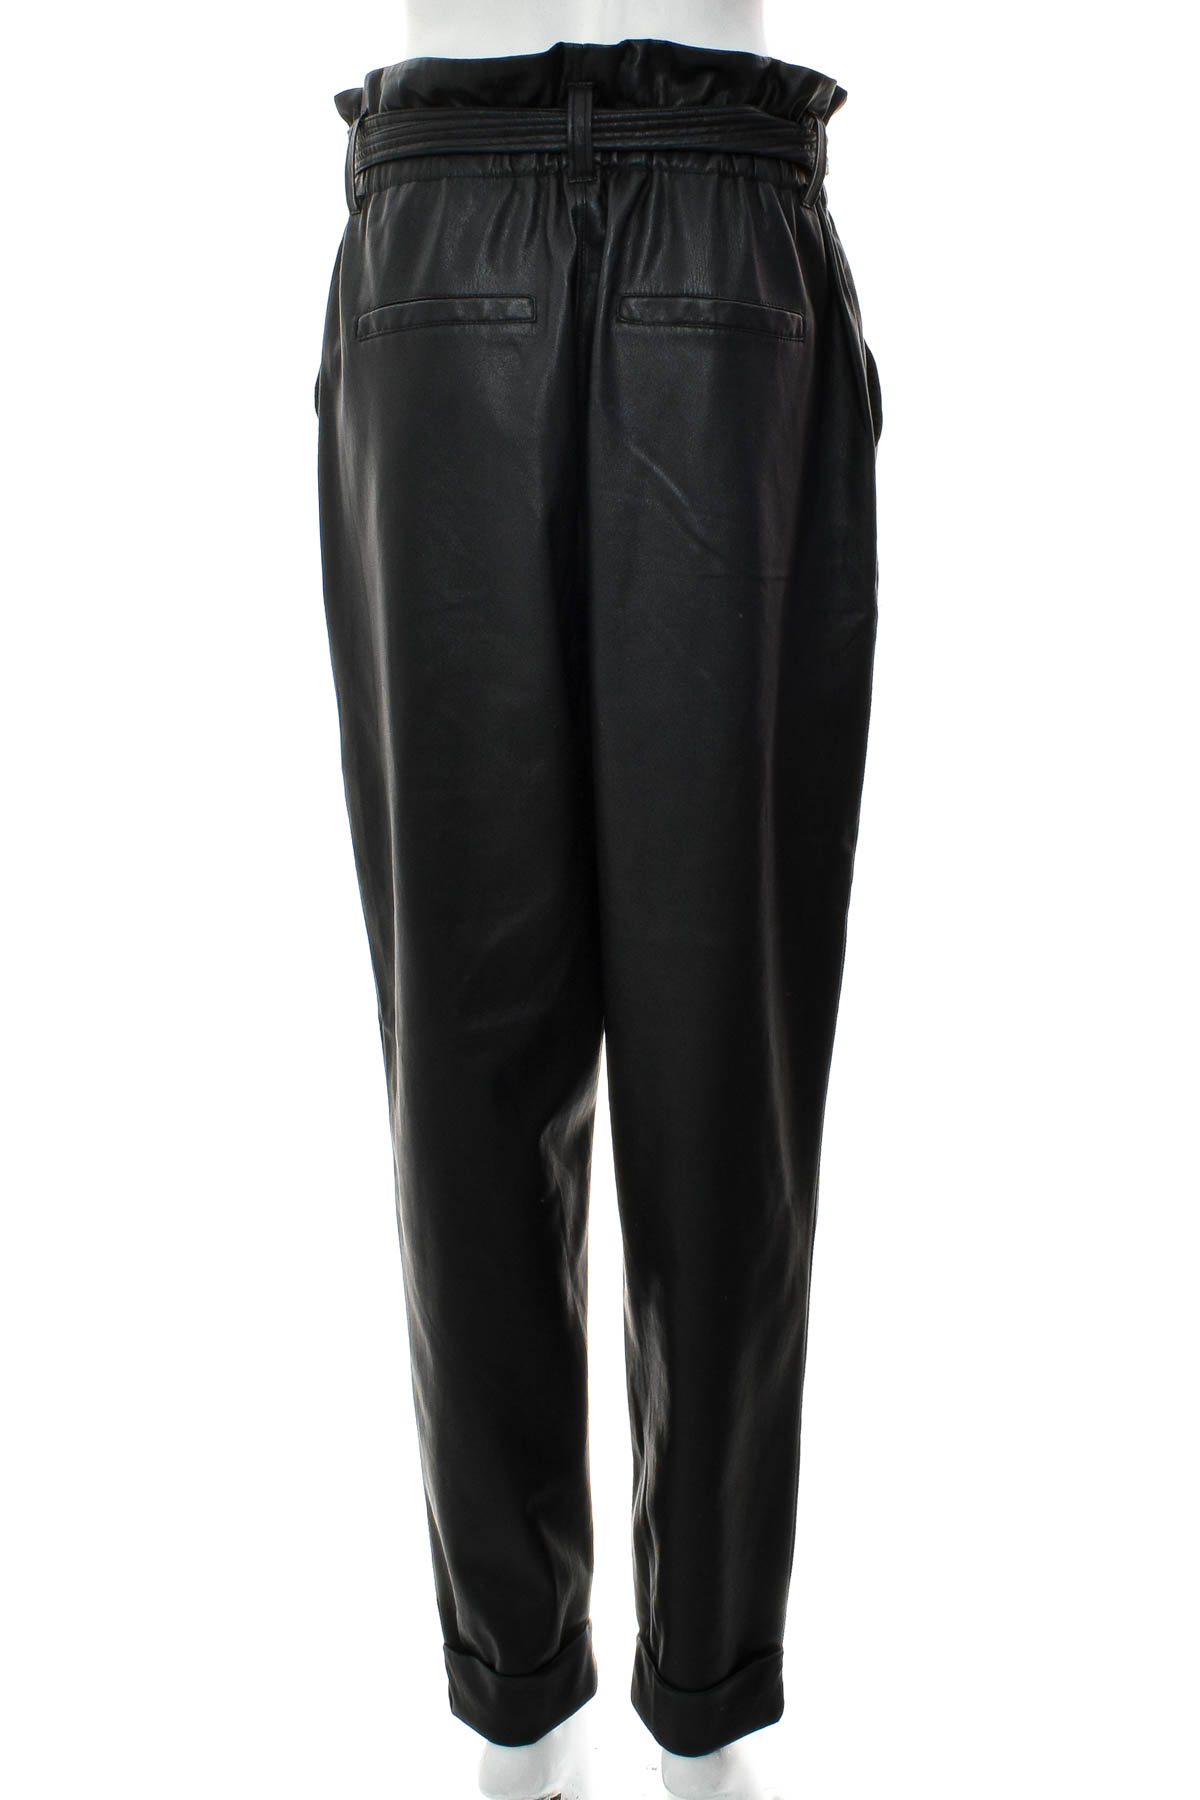 Women's leather trousers - Mbym - 1